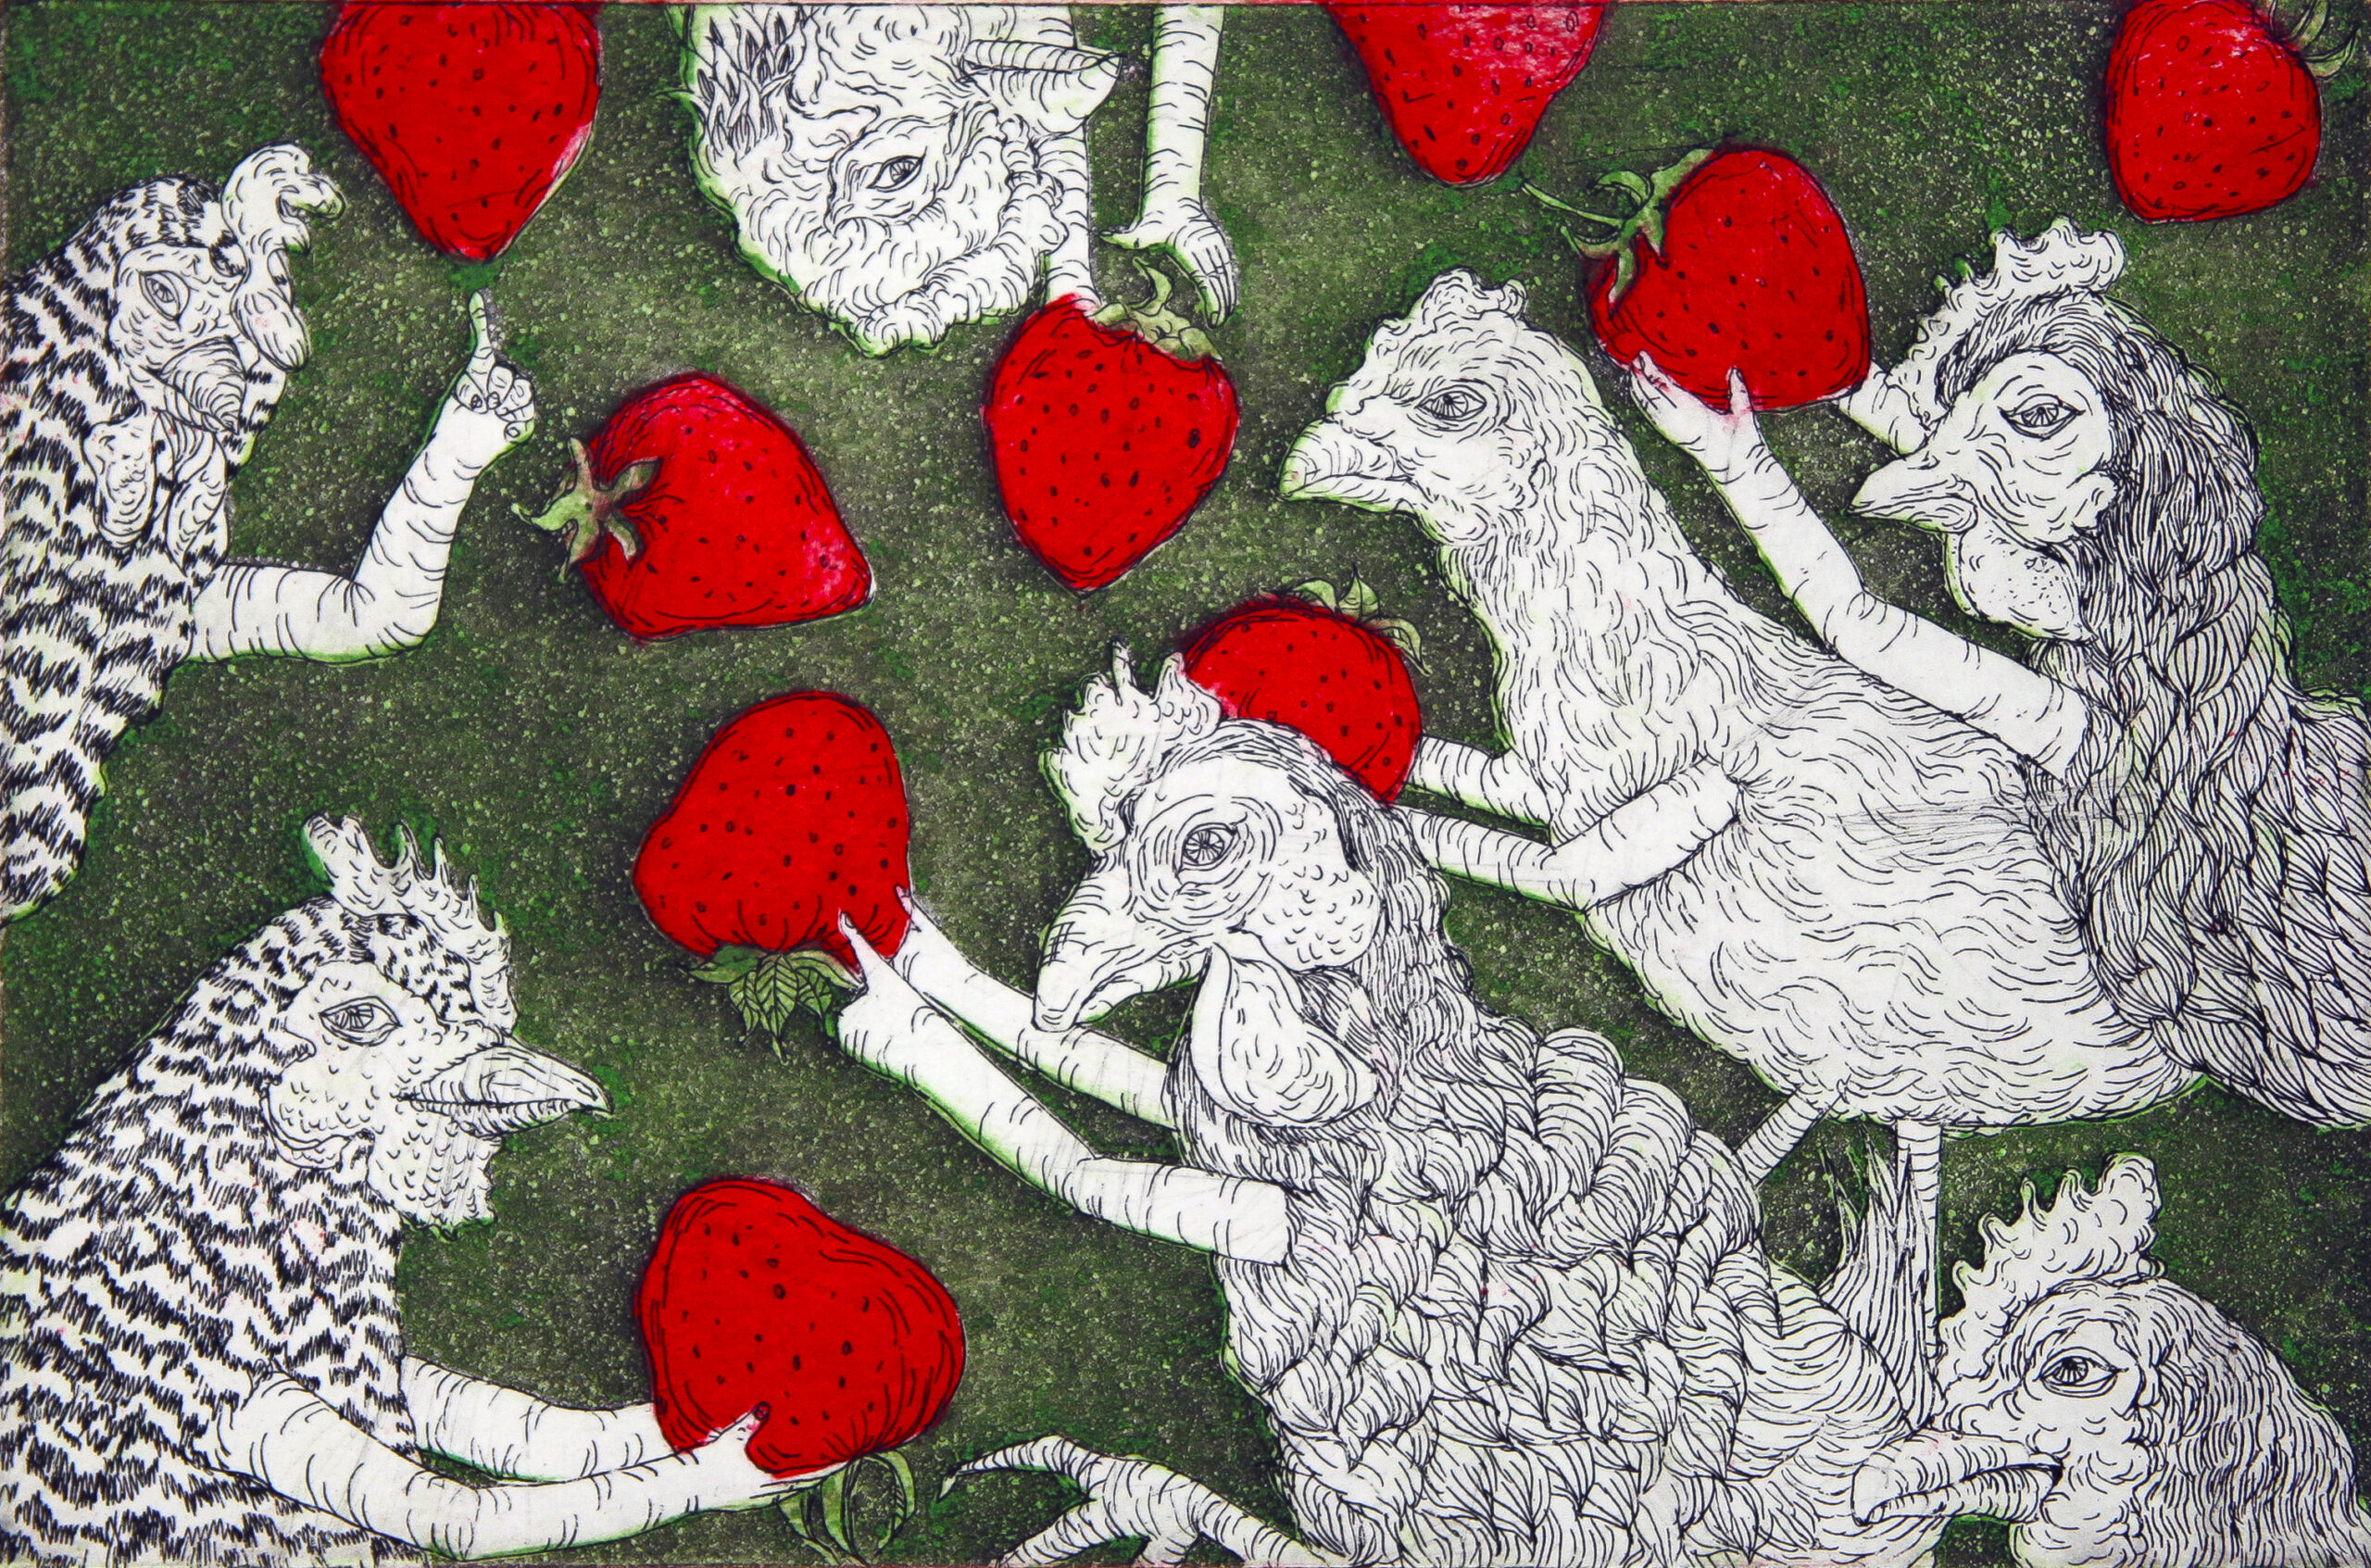 A copperplate etching of anthropomorphic chickens running around with strawberries. The background is a forest green aquatint and the strawberries are colored red with collagraph.